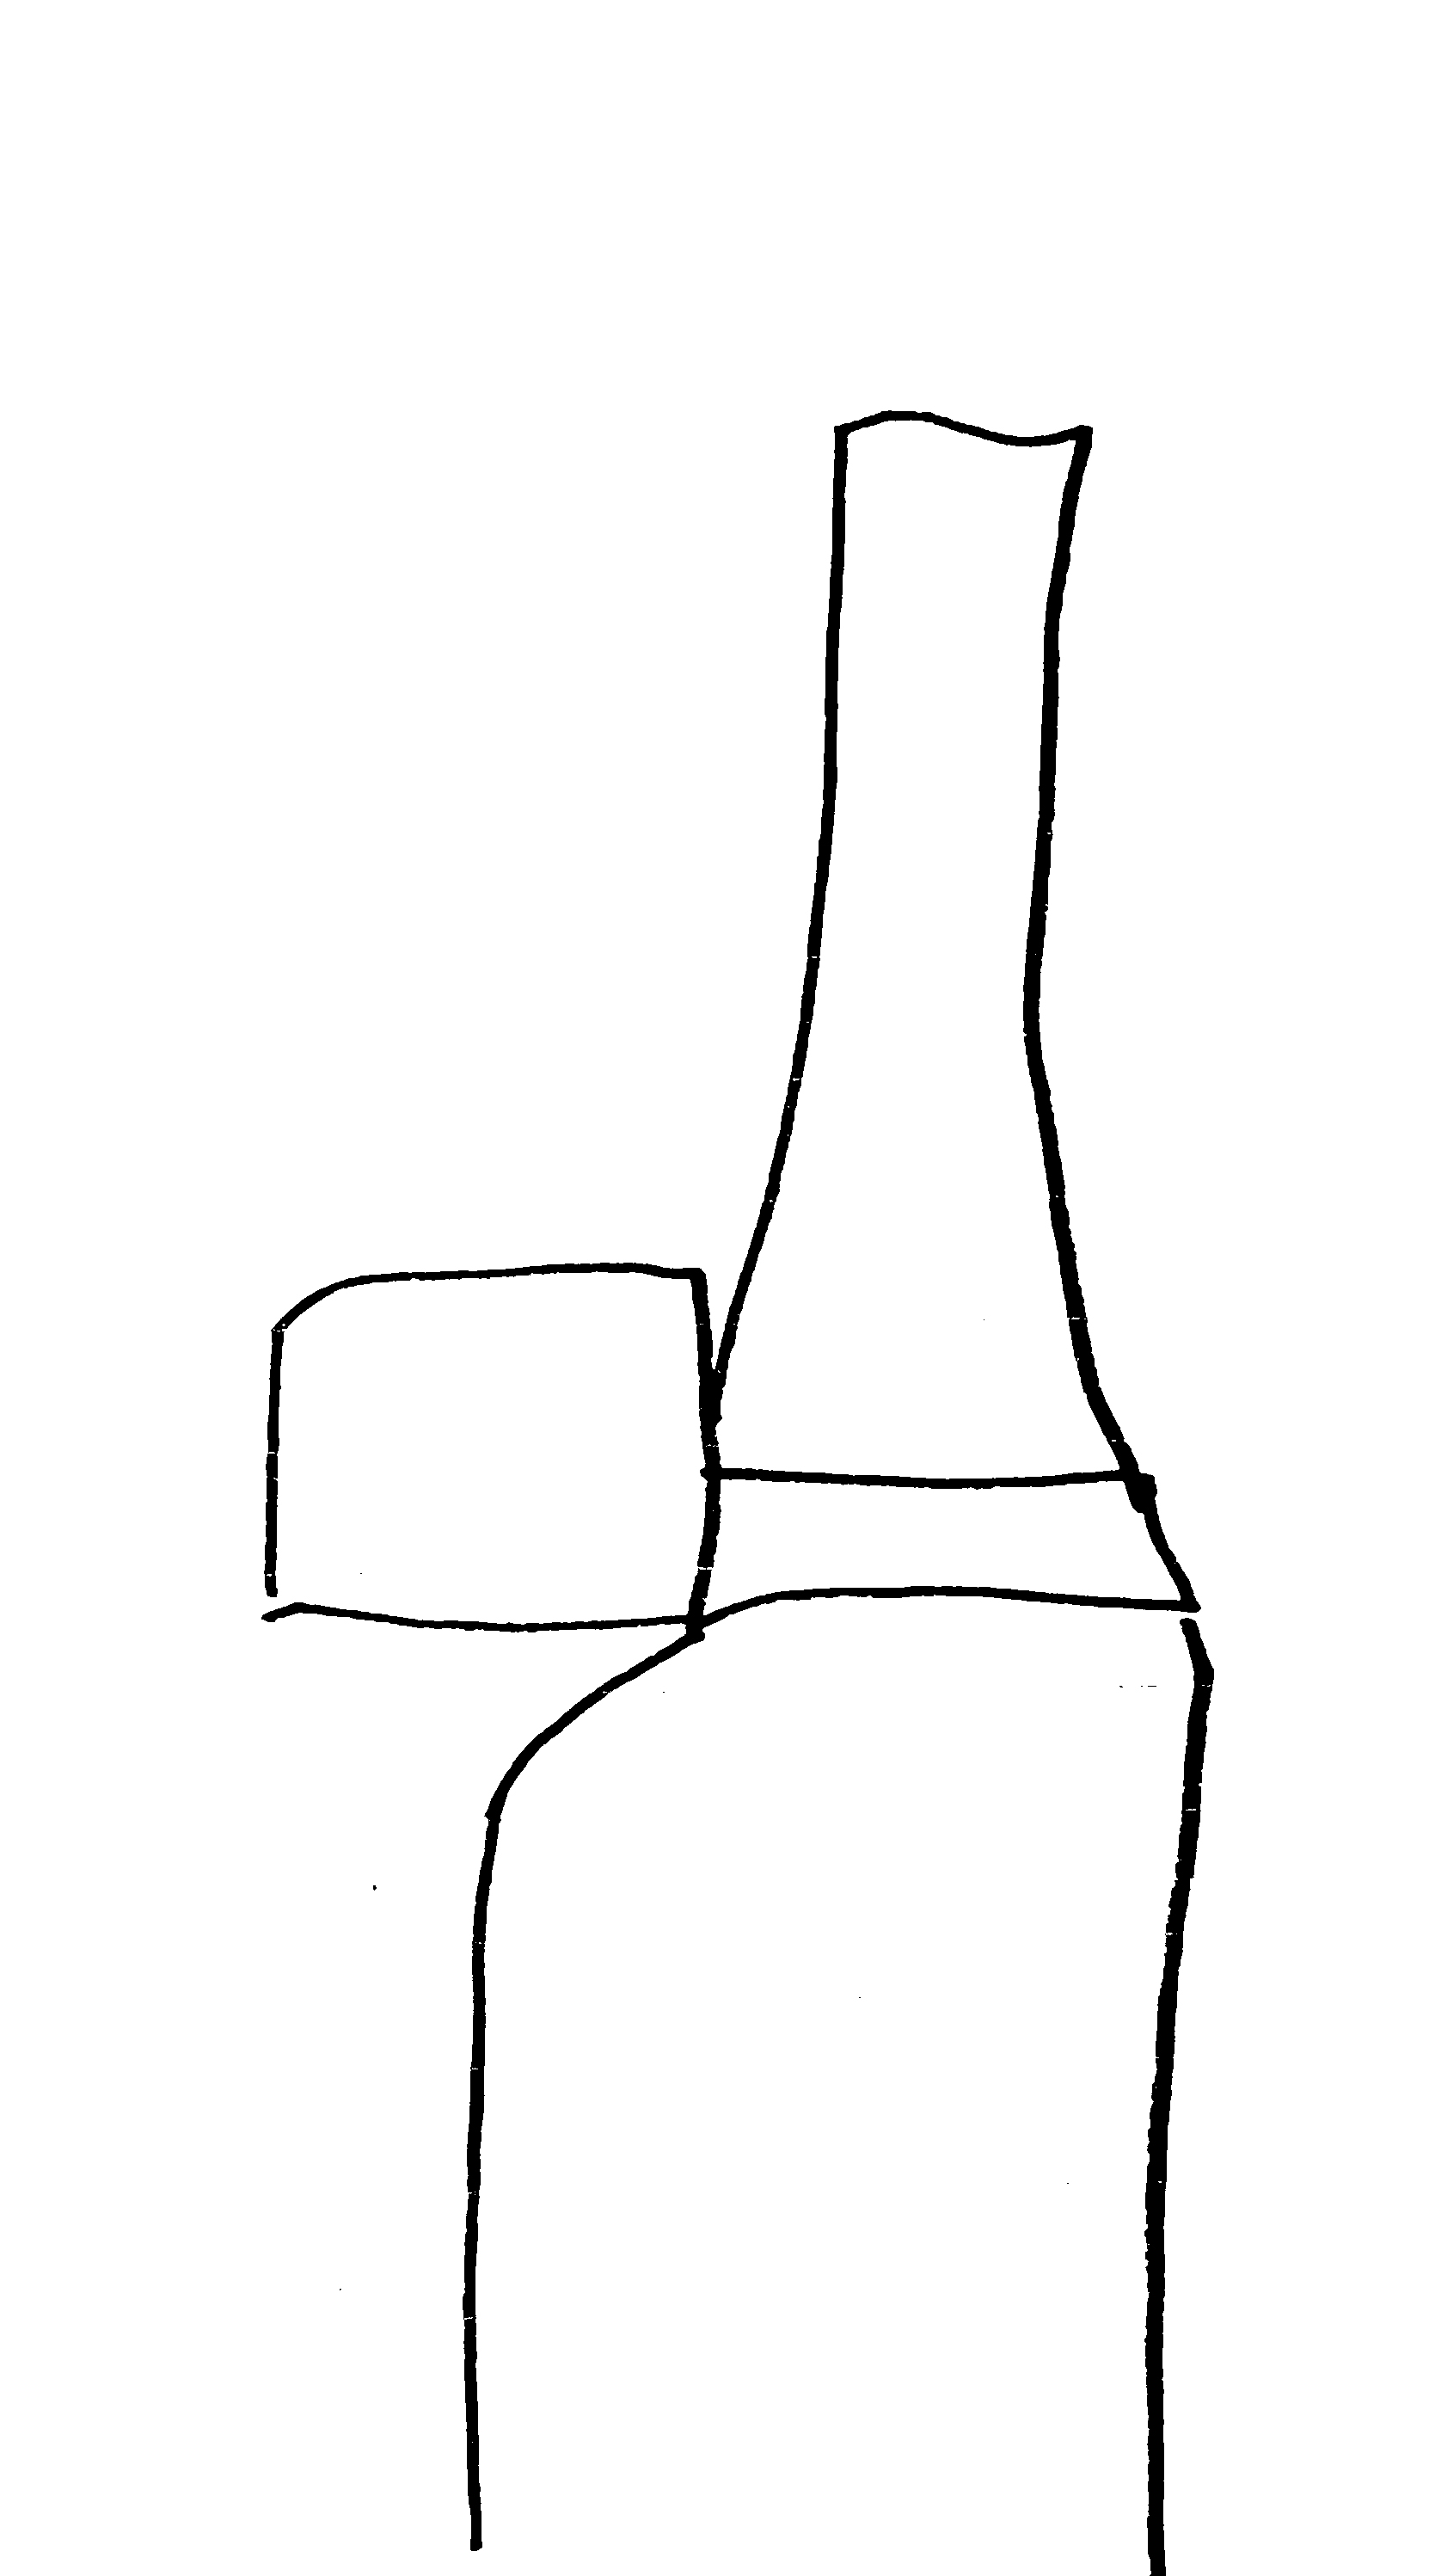 pen drawing of a bottle with a label attached